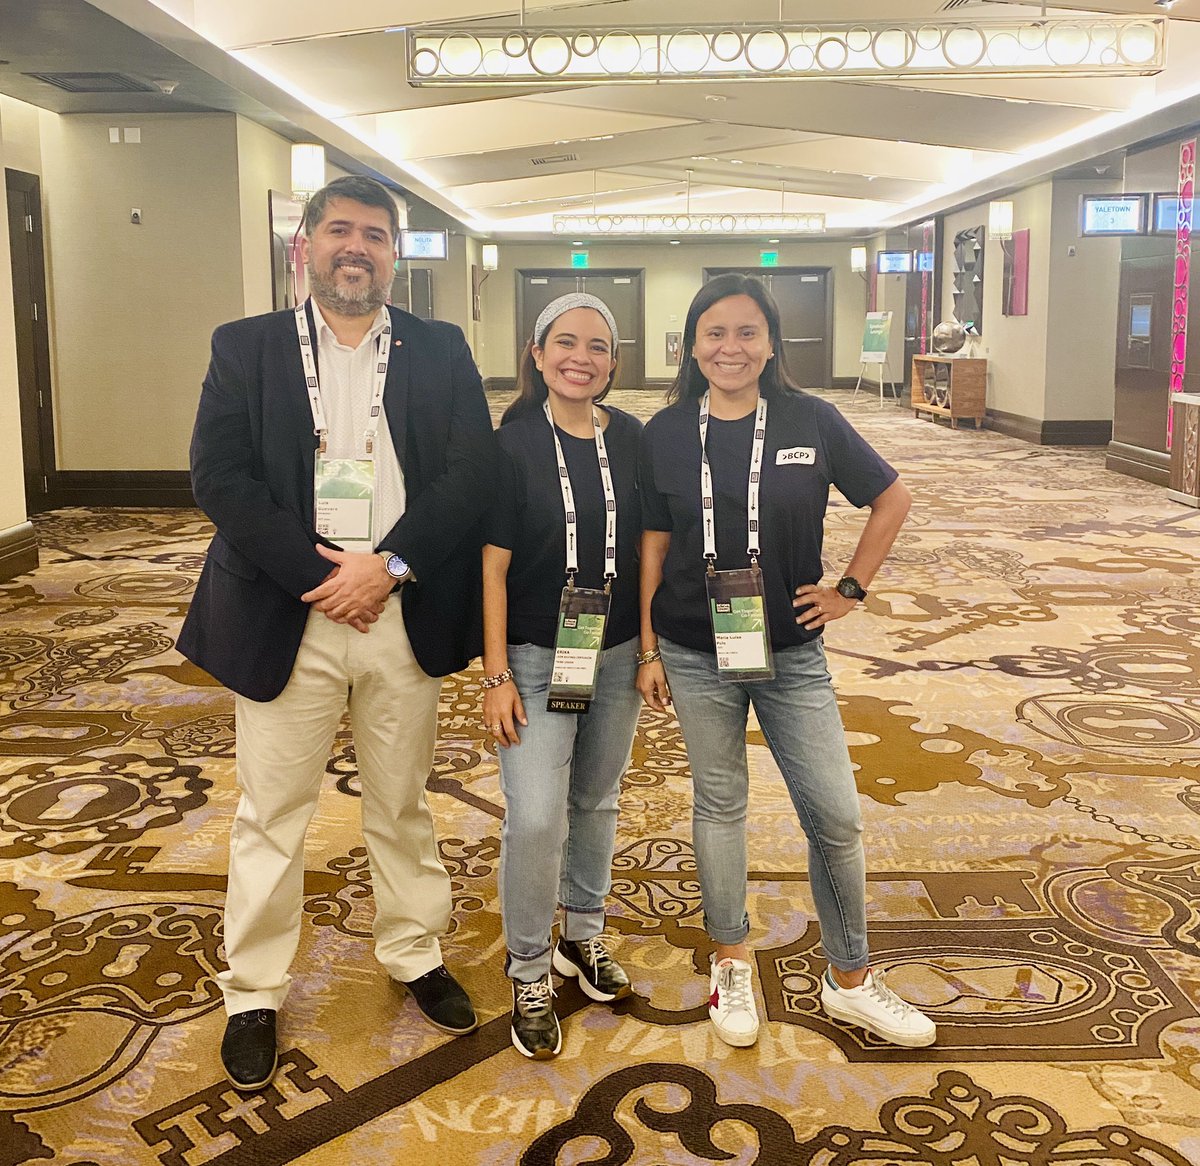 Fresh off the stage at #DOES23 presenting their talk, “Accelerating Value Delivery with Site Reliability Engineering:” Luis Alberto Guevara Sandoval of @NTTData and @SoyErikaLeonR and Maria Luisa Polo of @BCPComunica